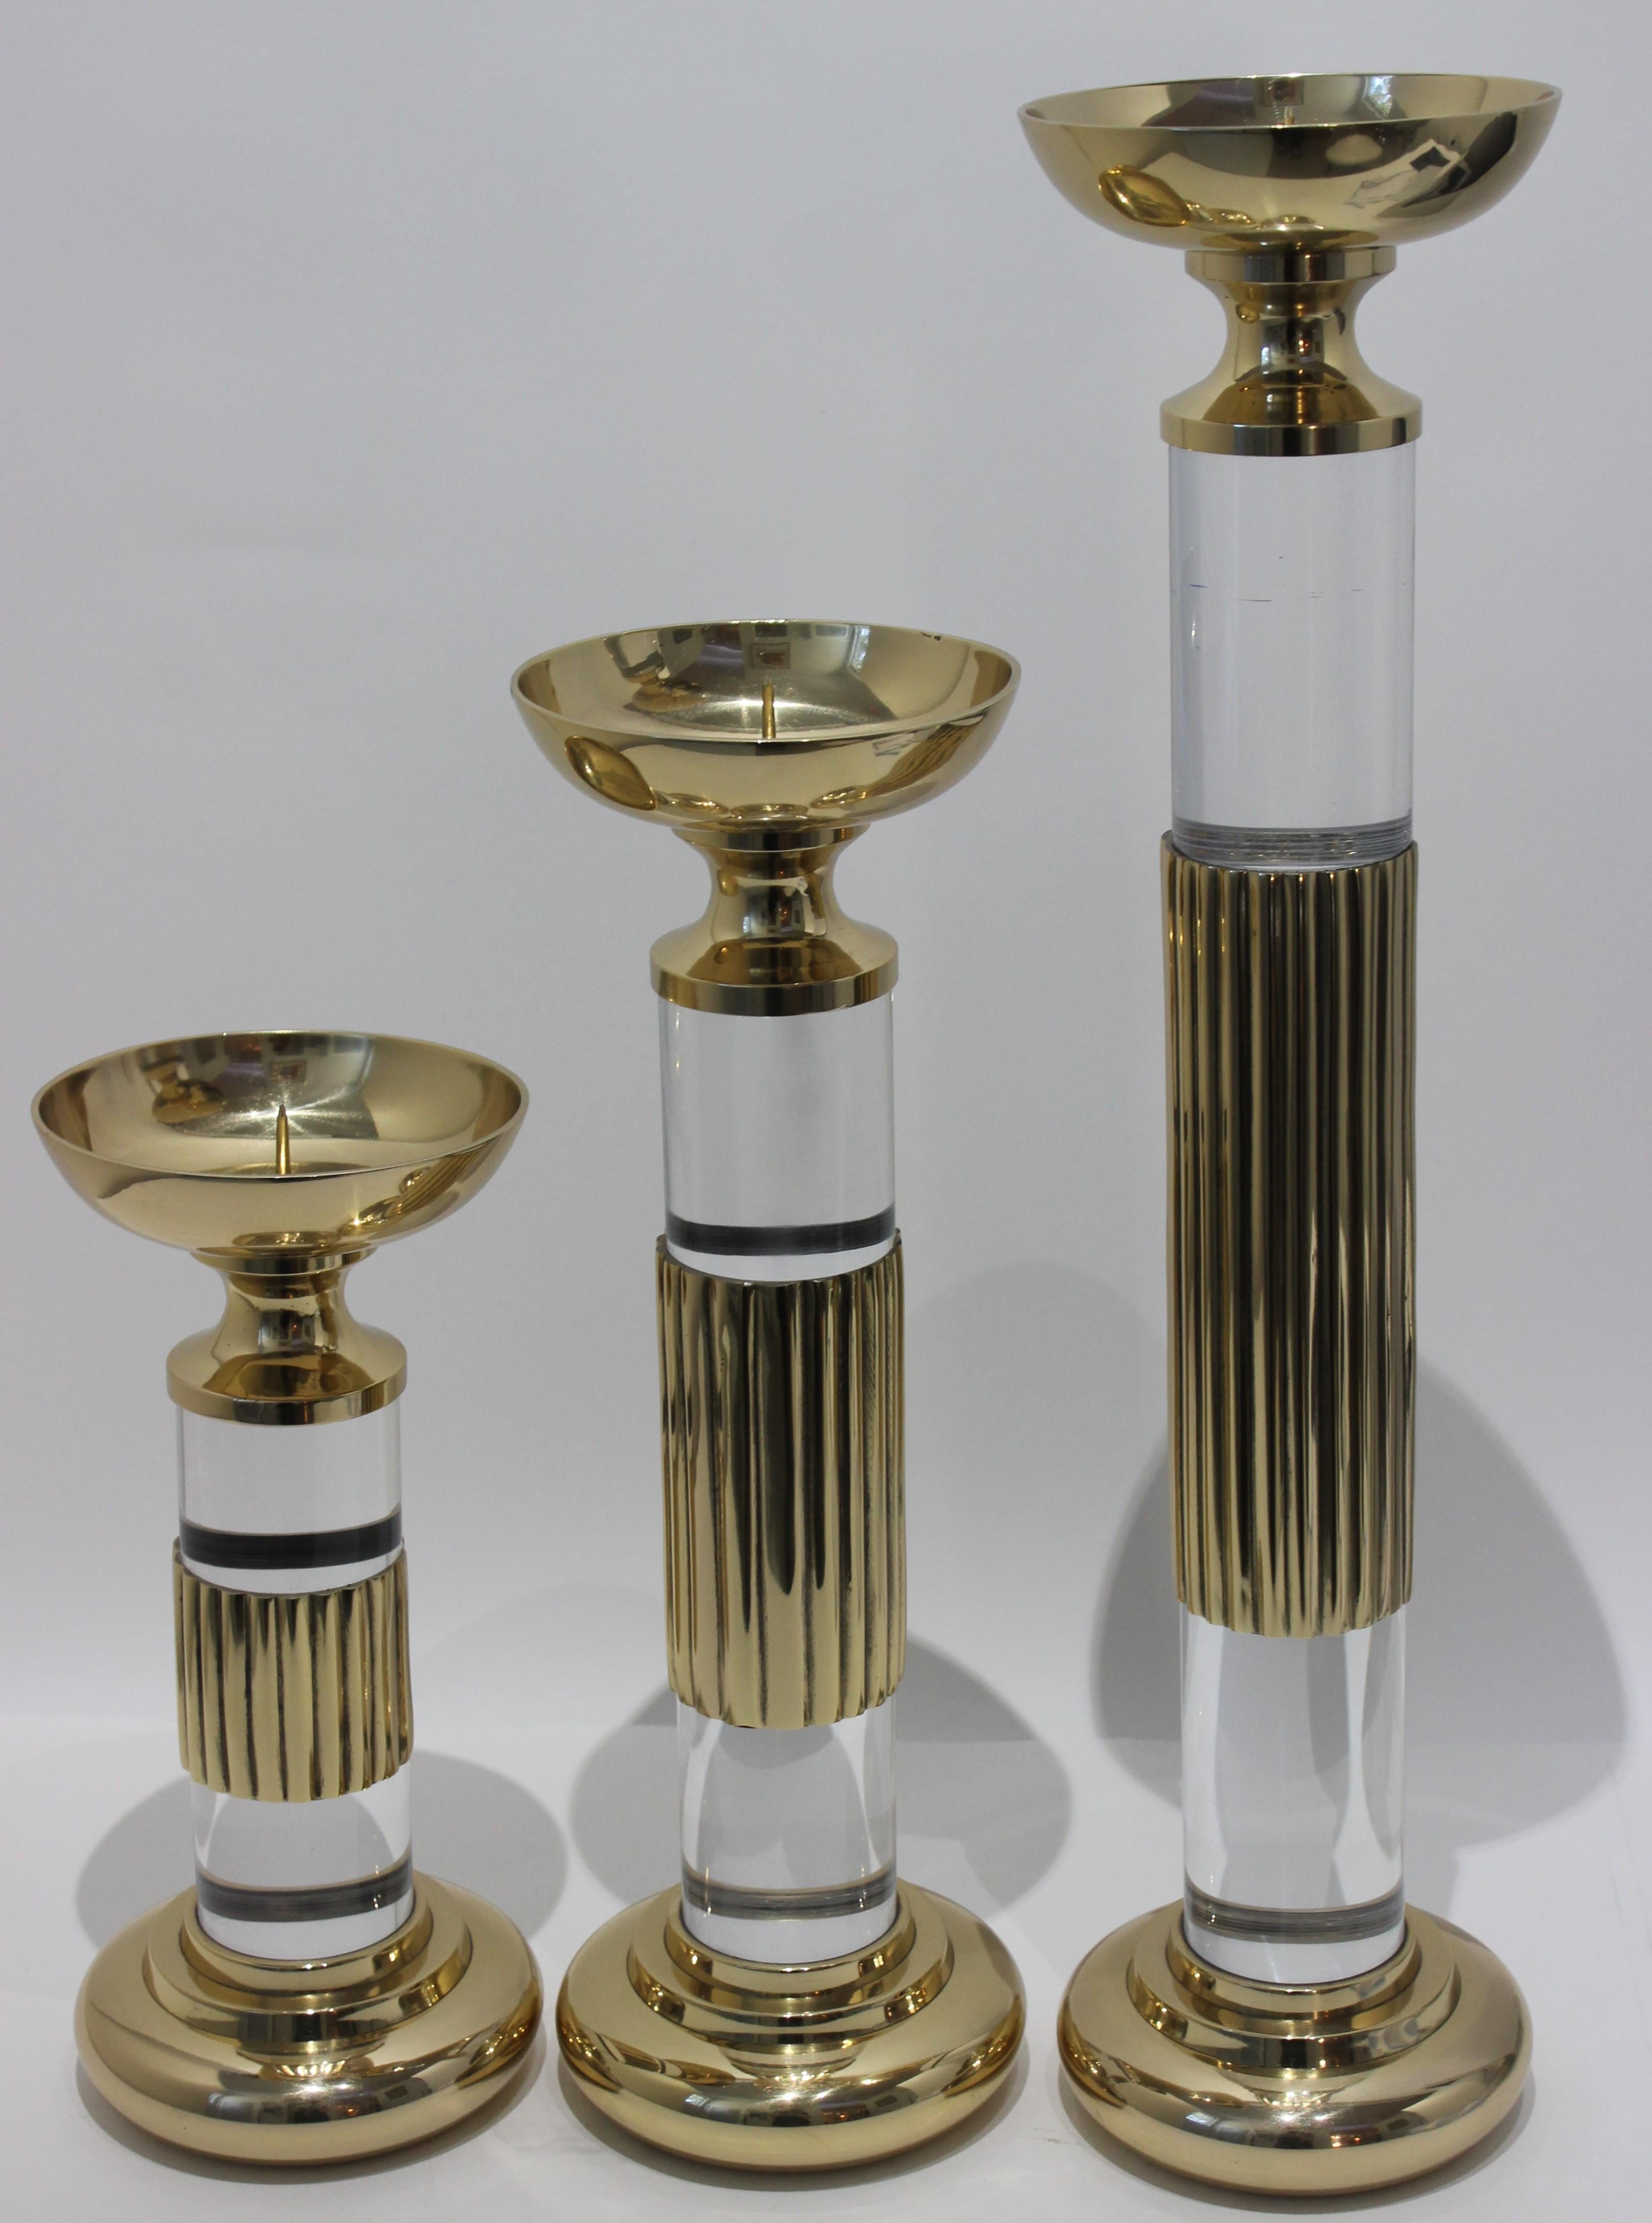 This stylish set of candlesticks date to 1987 and were fabricated by Dolbi Cashier in polished brass and Lucite. These have been professionally polished February 2020.

Note: Dimensions of tallest piece 23.63